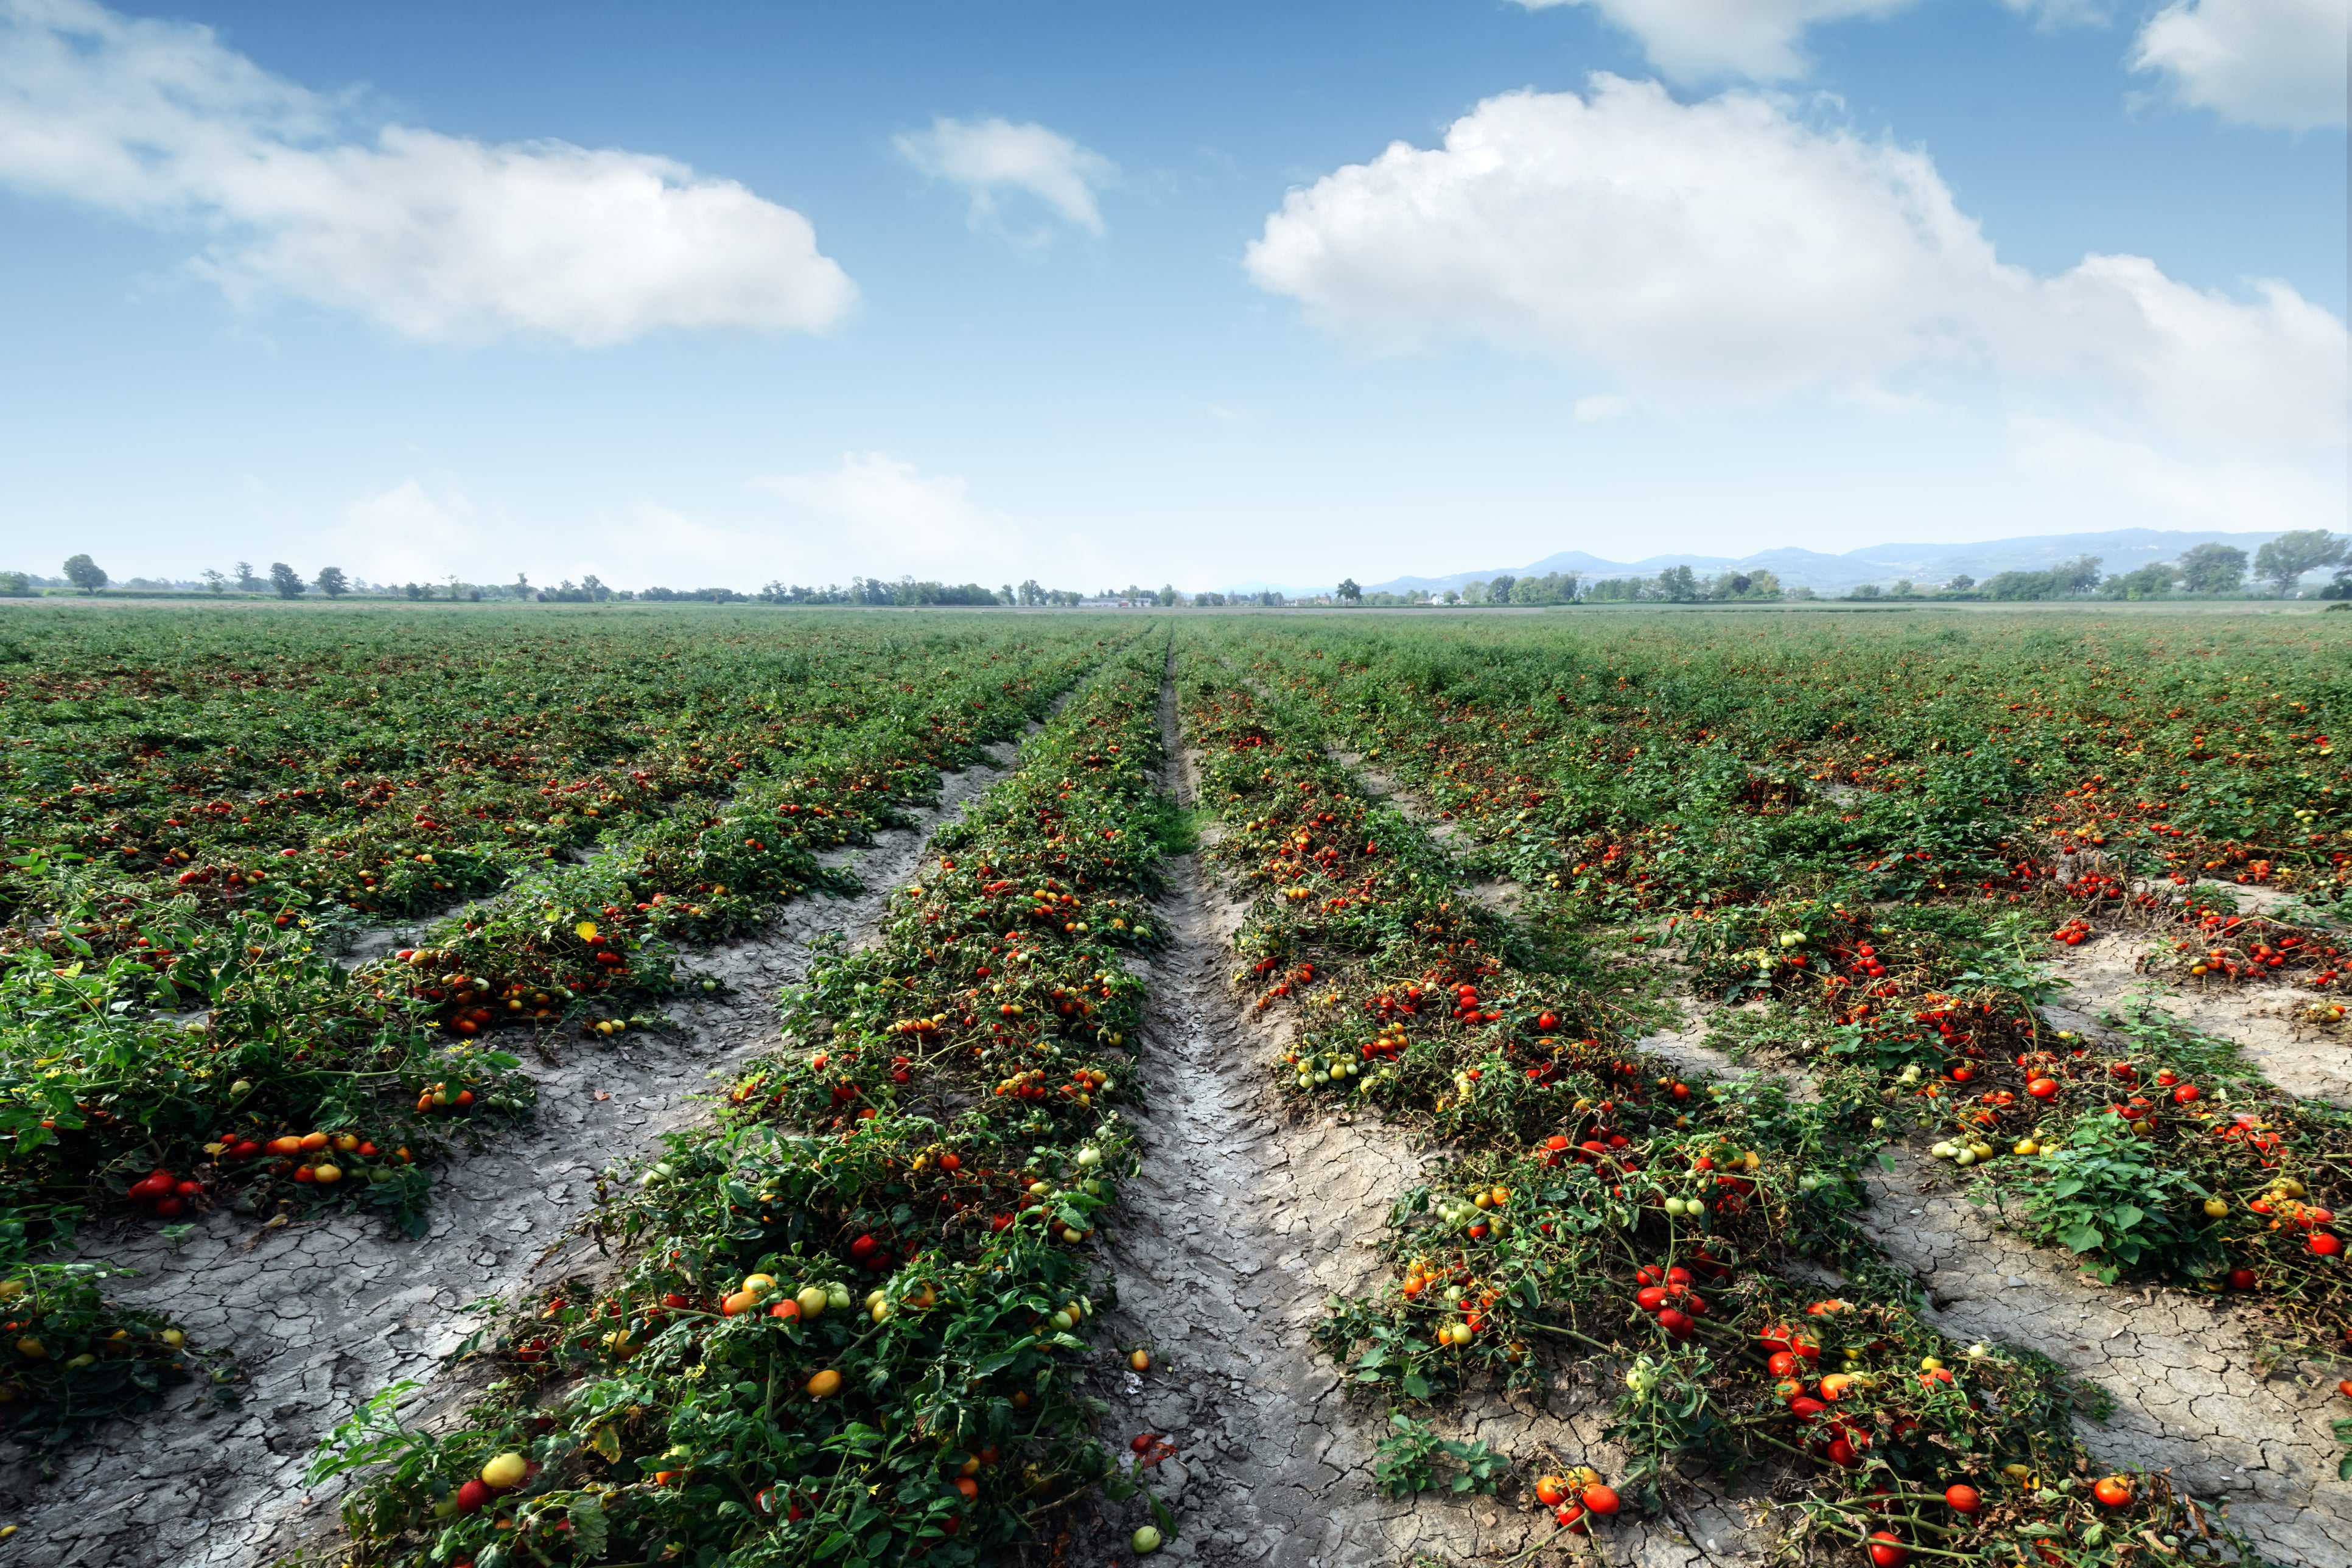 Image of a tomato field on a farm